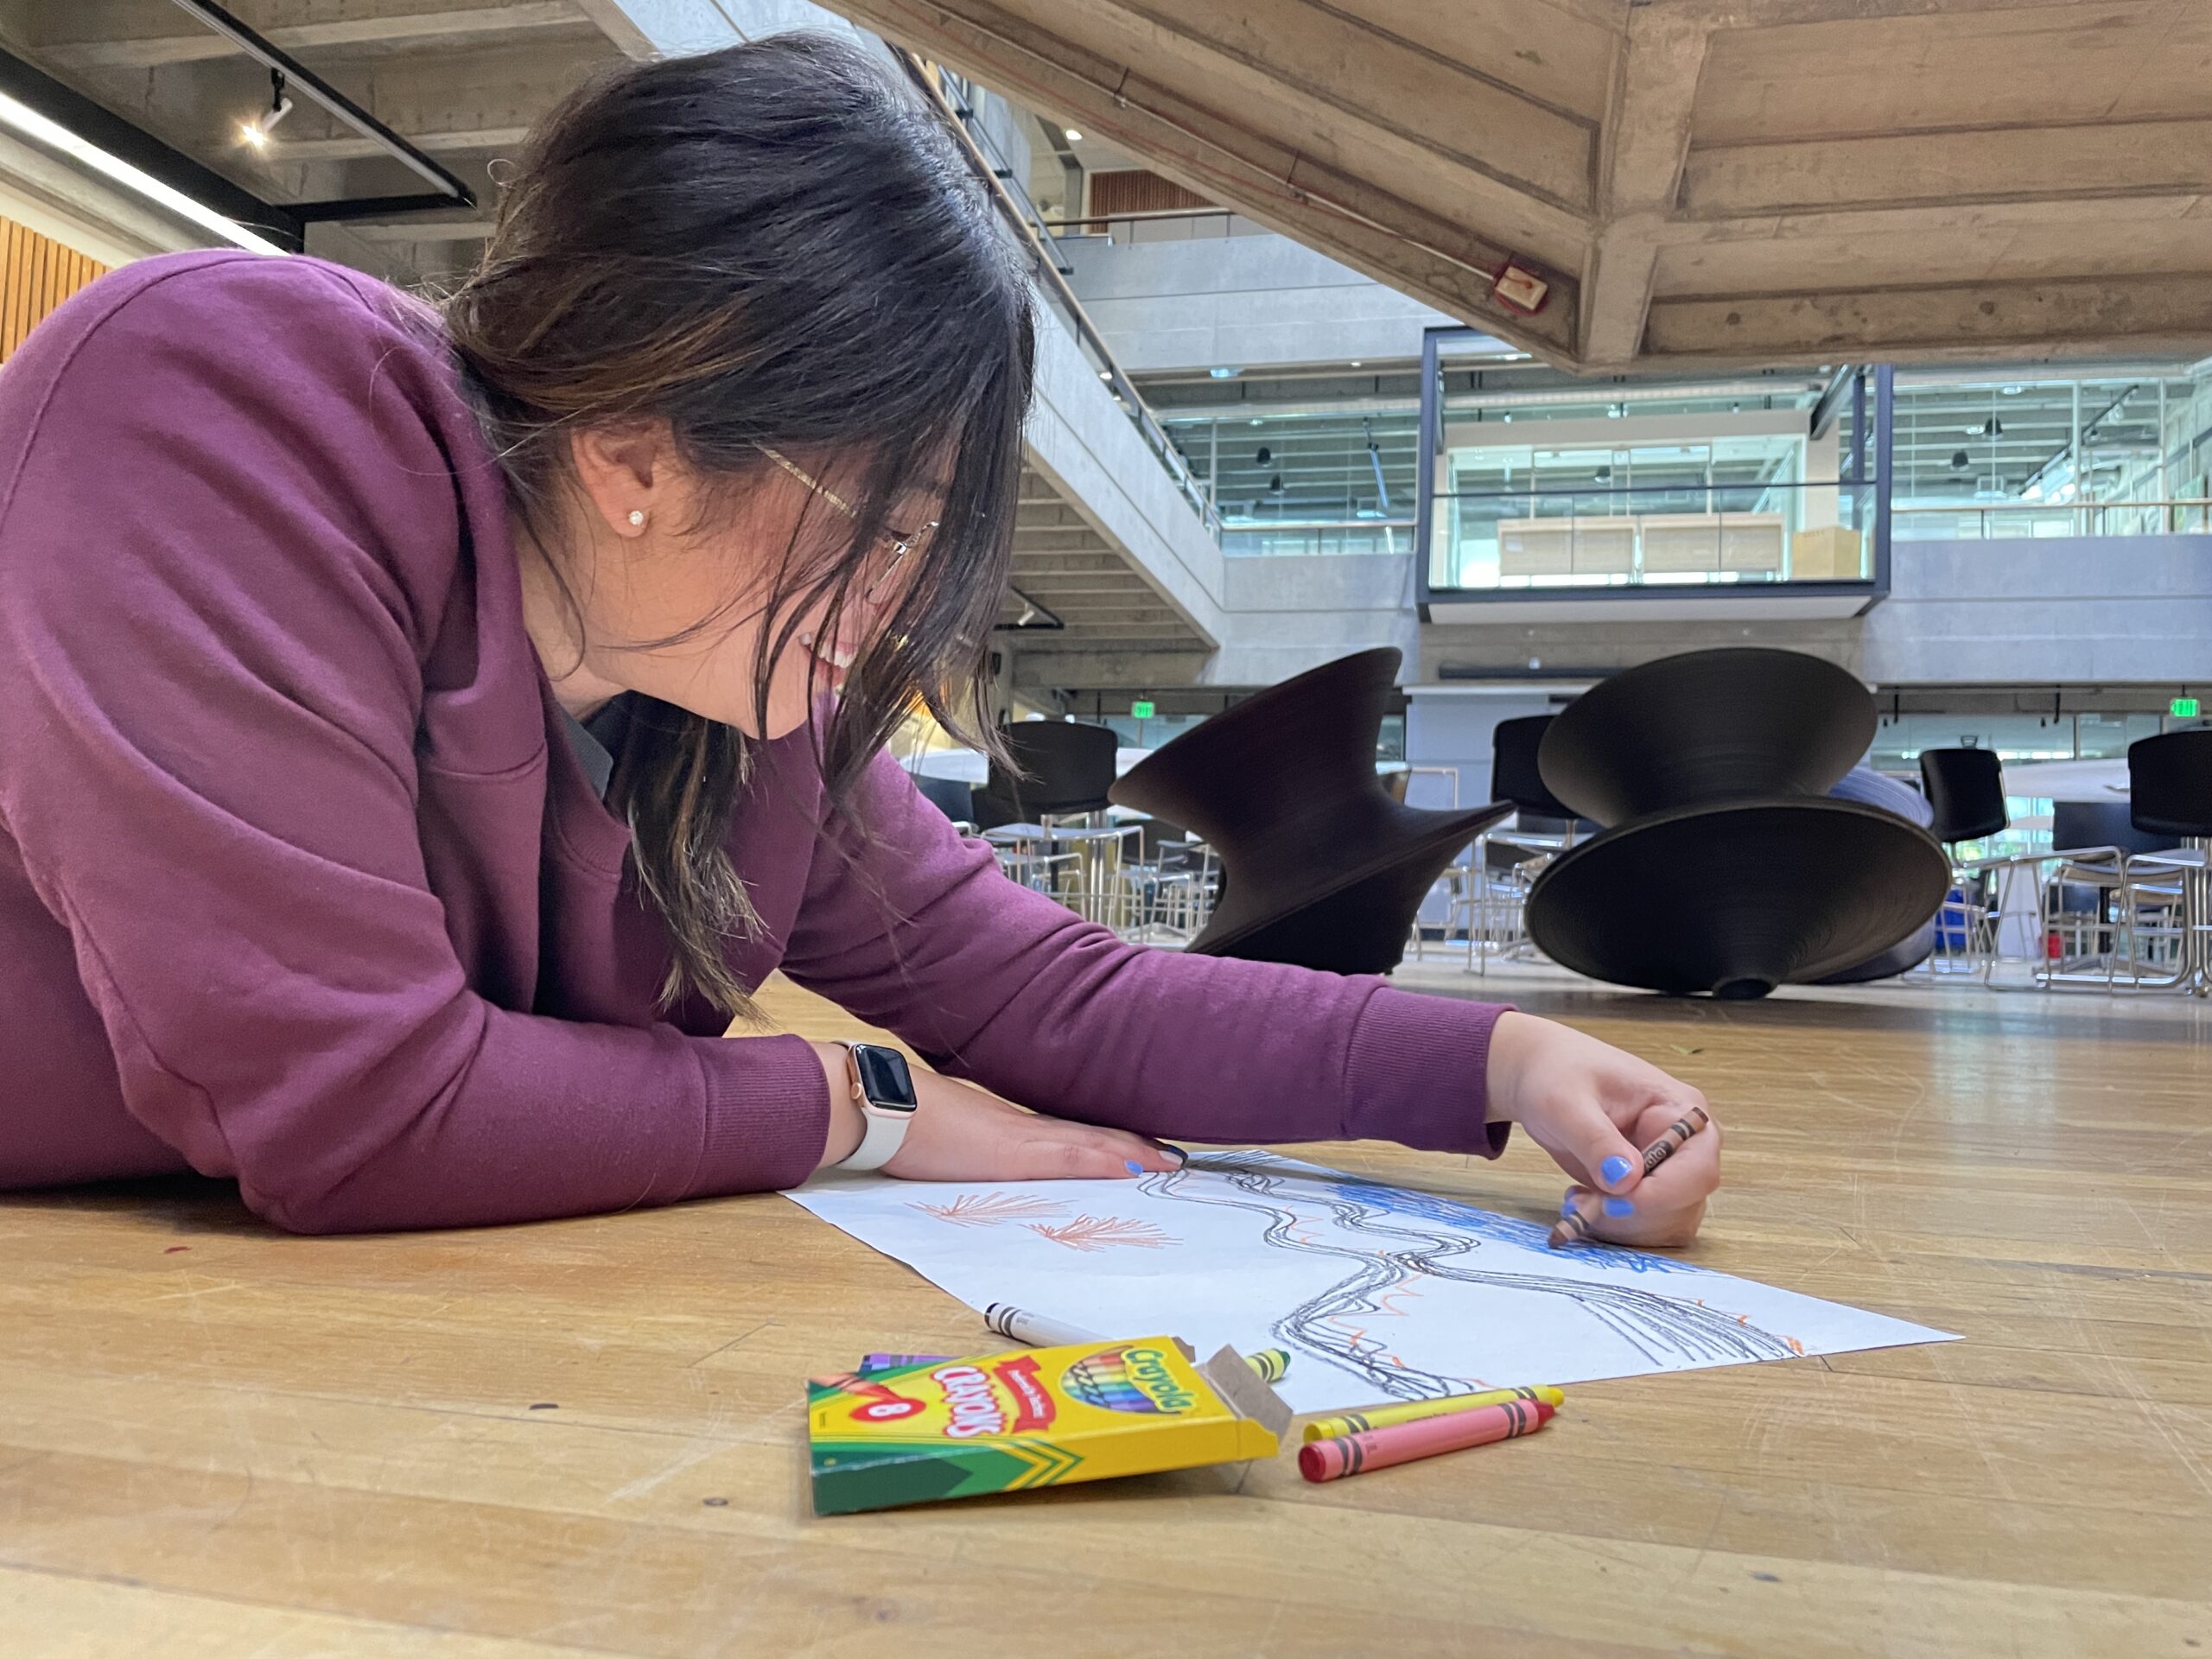 Person laying on ground drawing with crayons